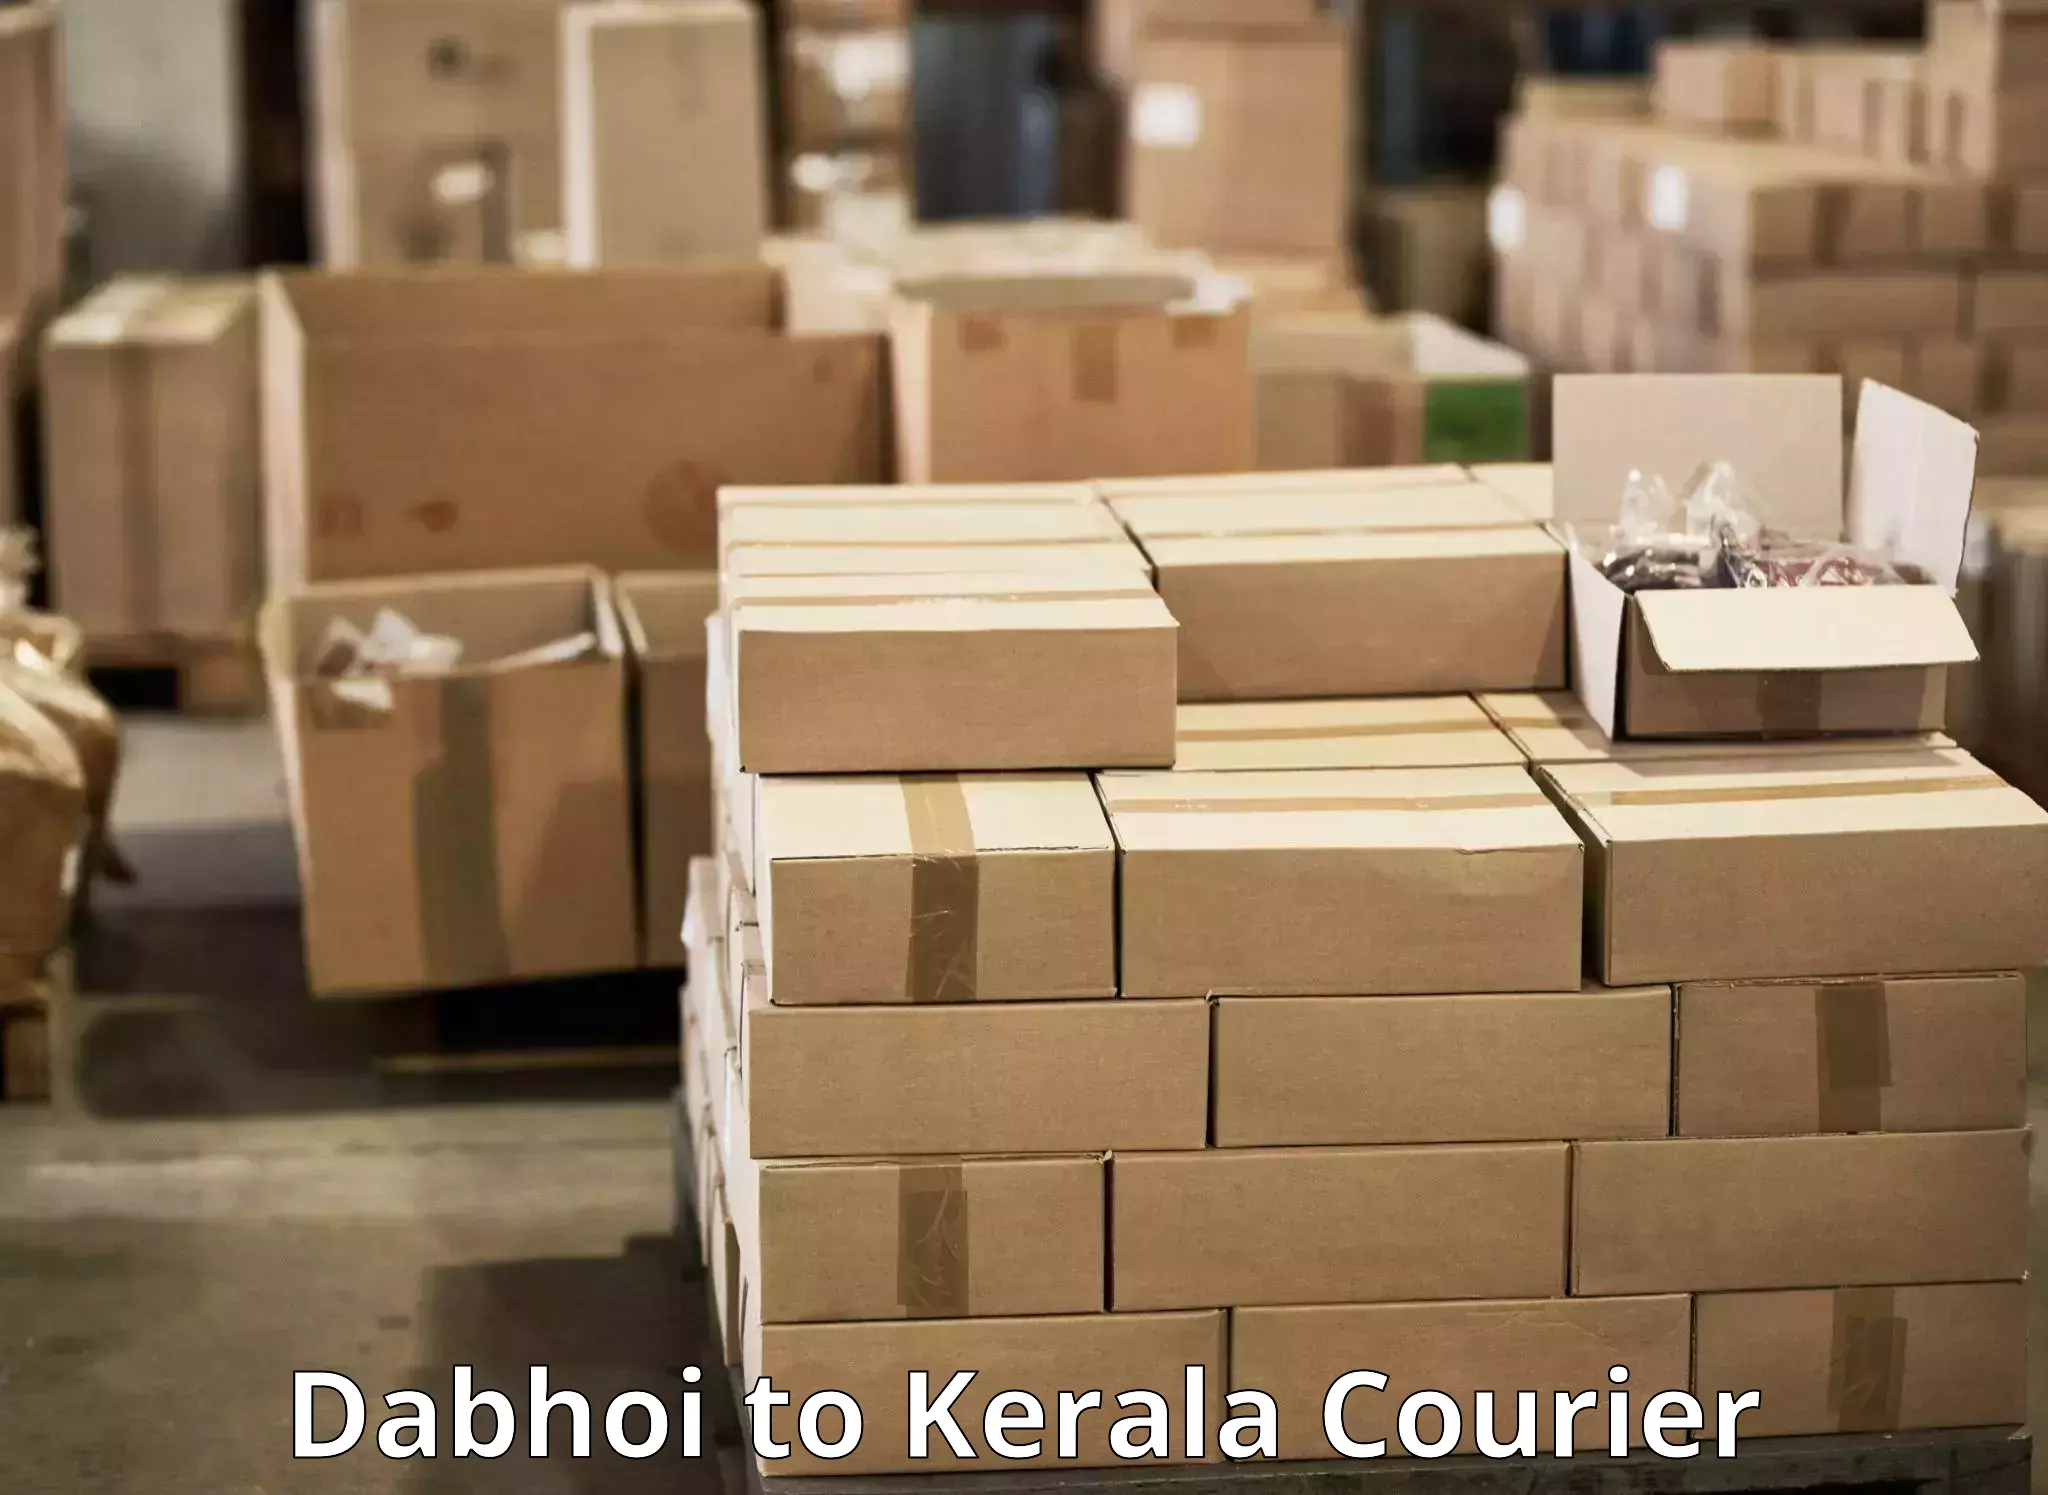 Courier service efficiency Dabhoi to Kollam